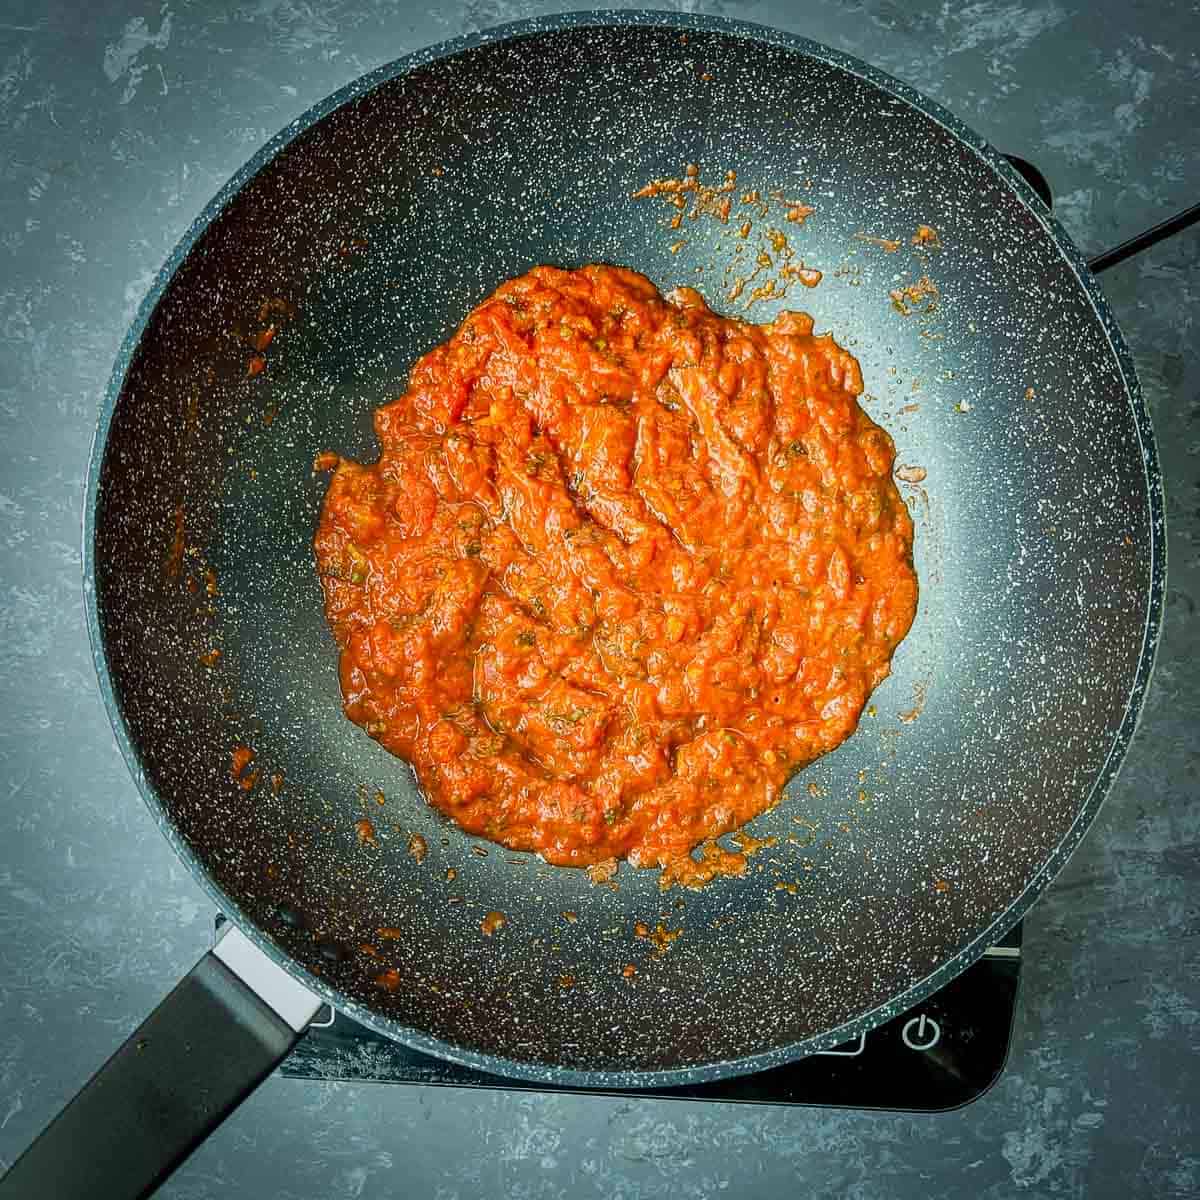 Cooked tomatoes and spices in a frying pan.